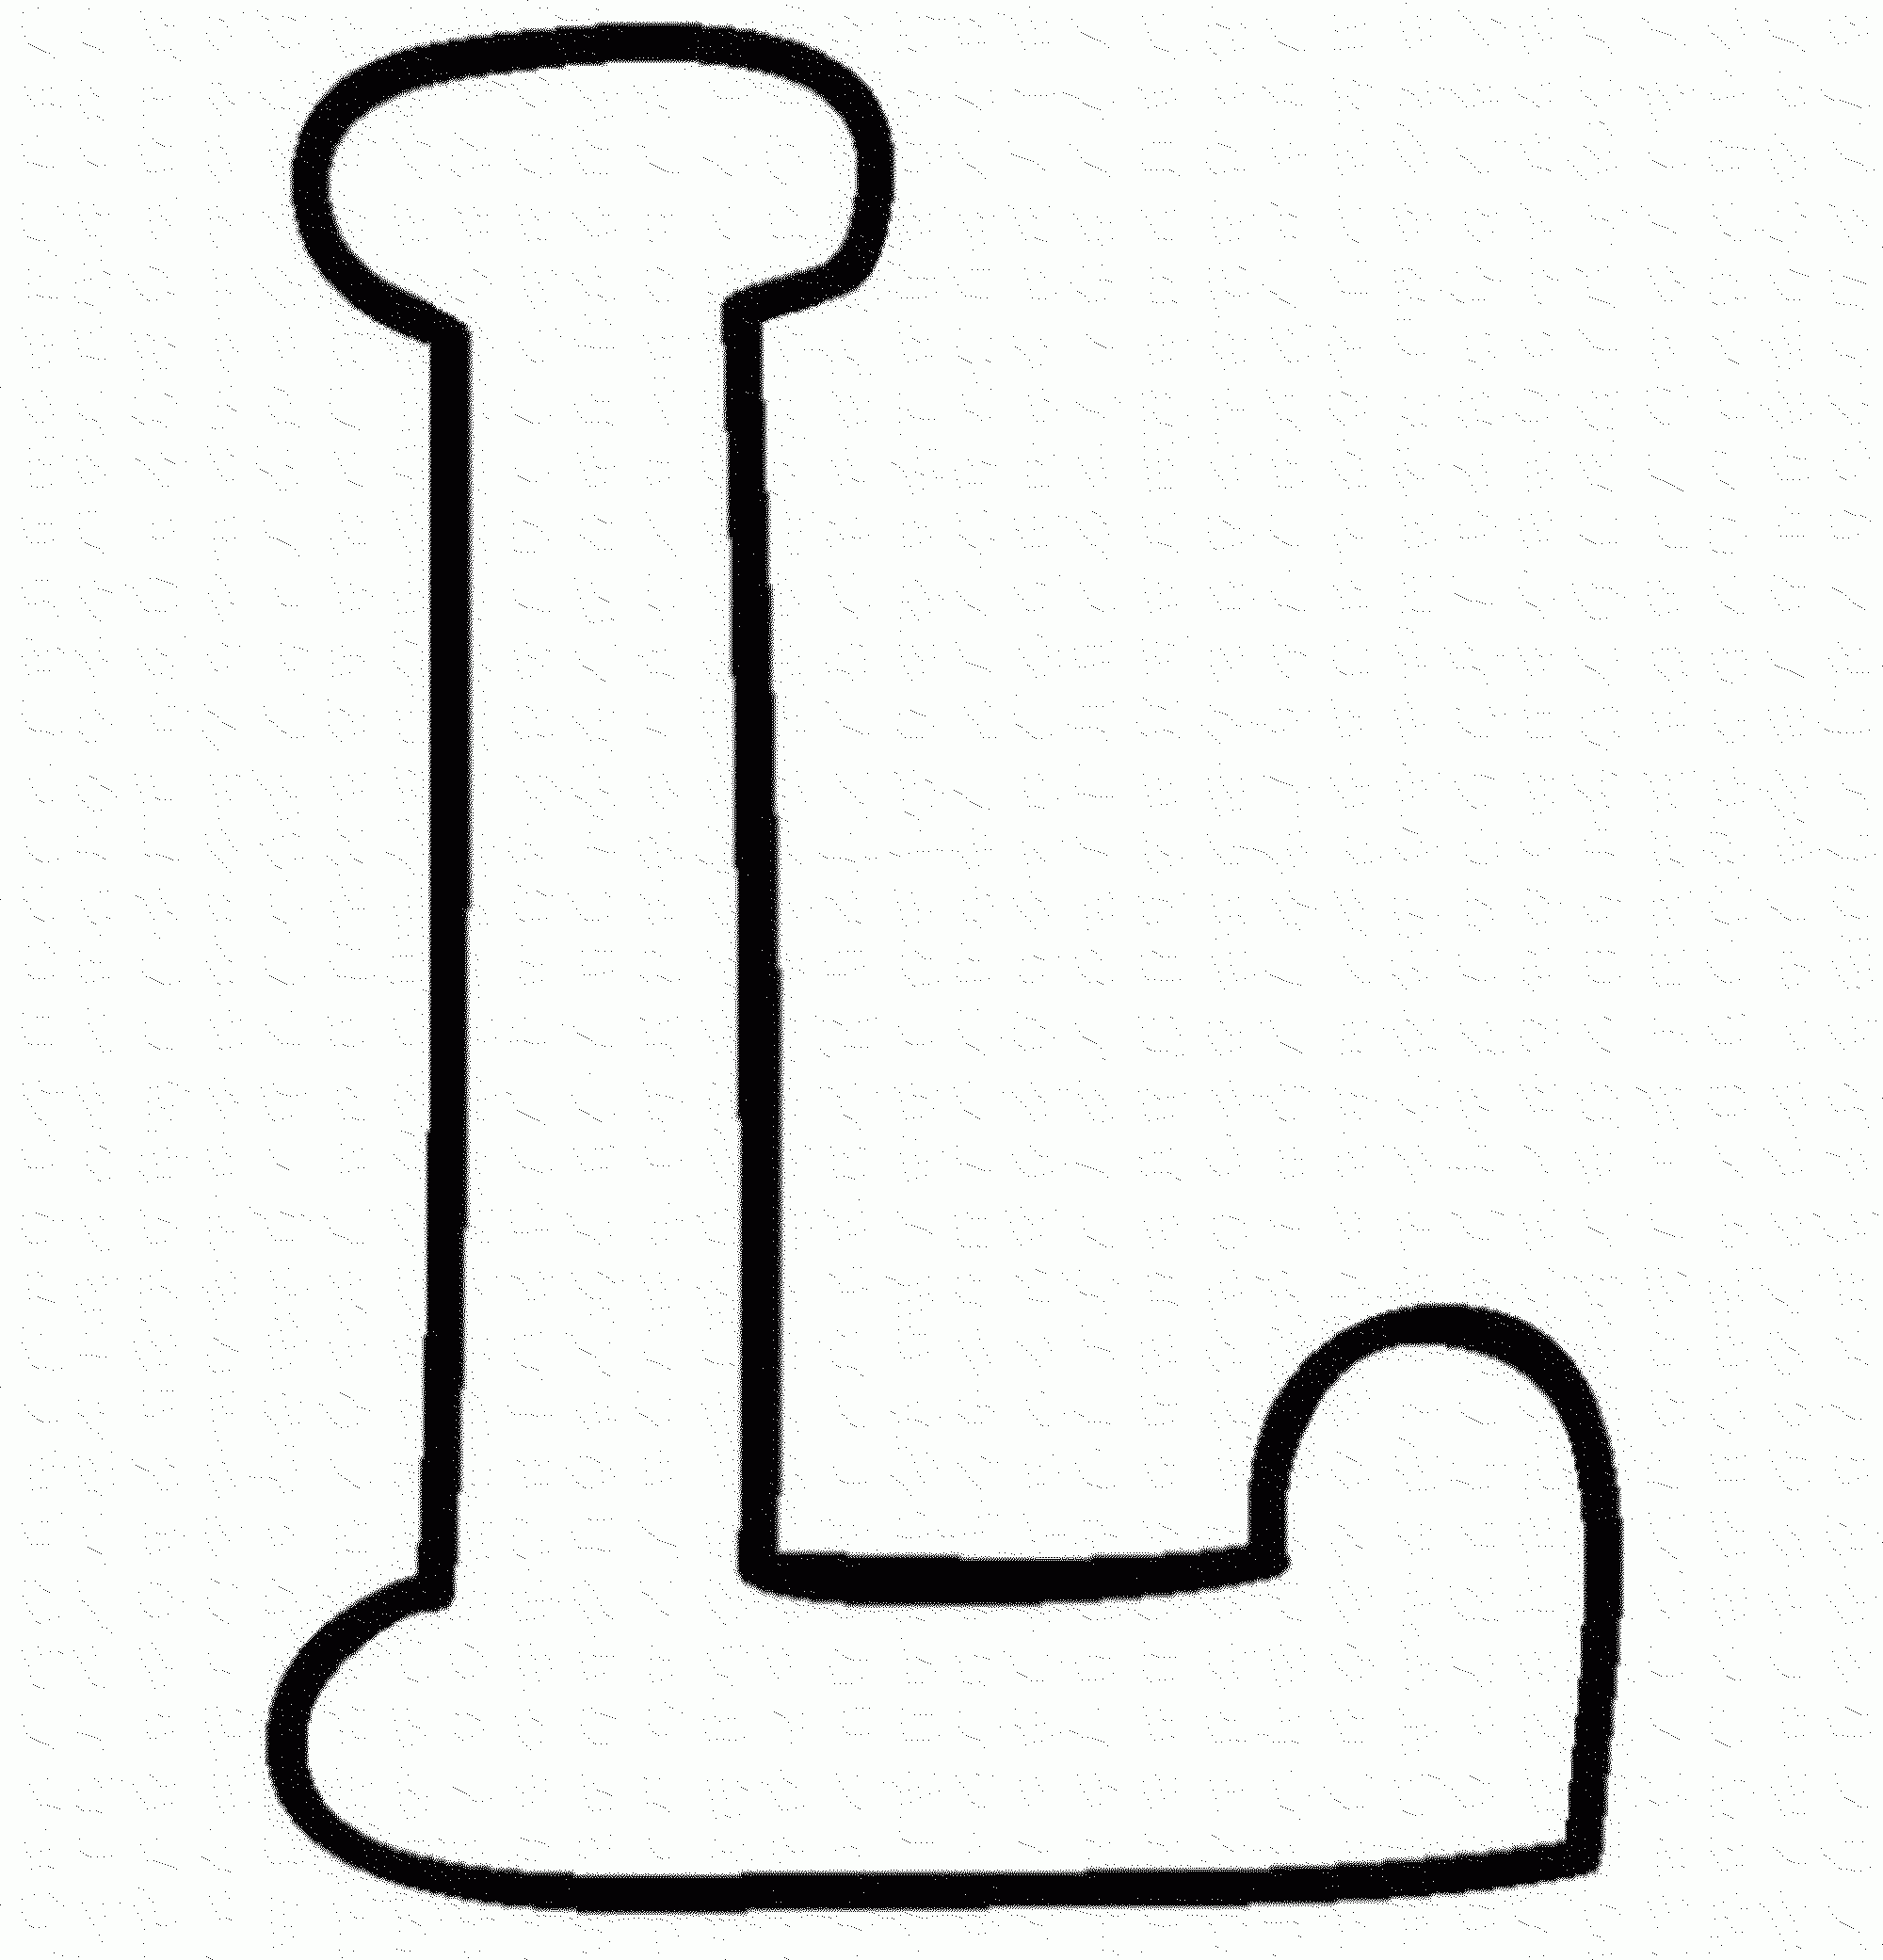 Handy Letter L Coloring Page Free Printable Coloring Pages - Widetheme